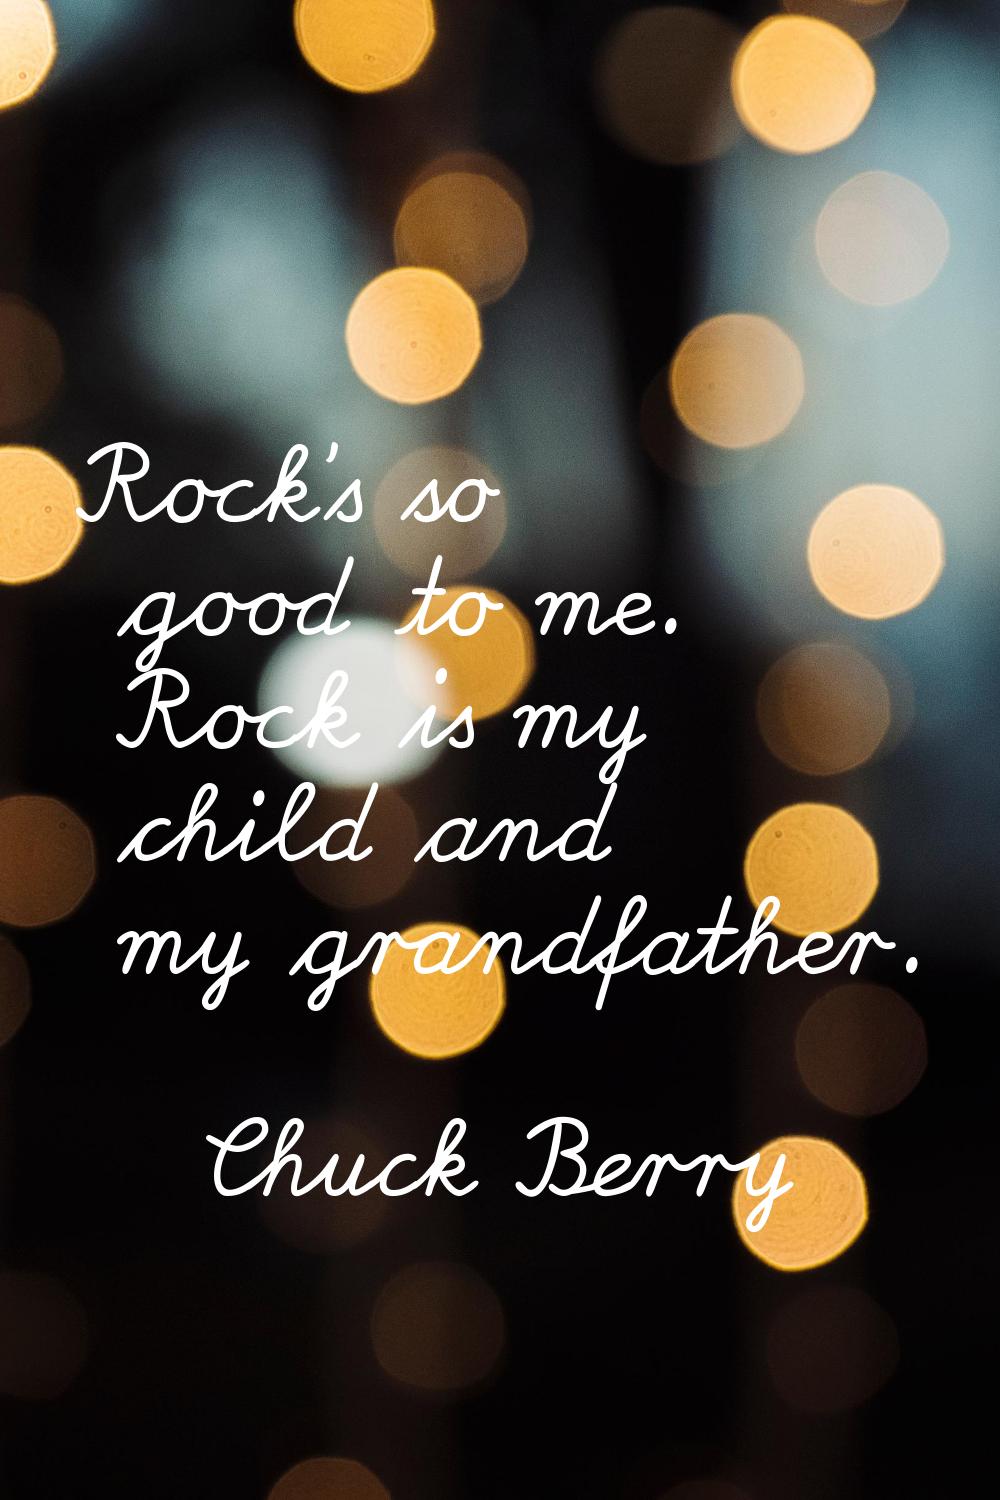 Rock's so good to me. Rock is my child and my grandfather.